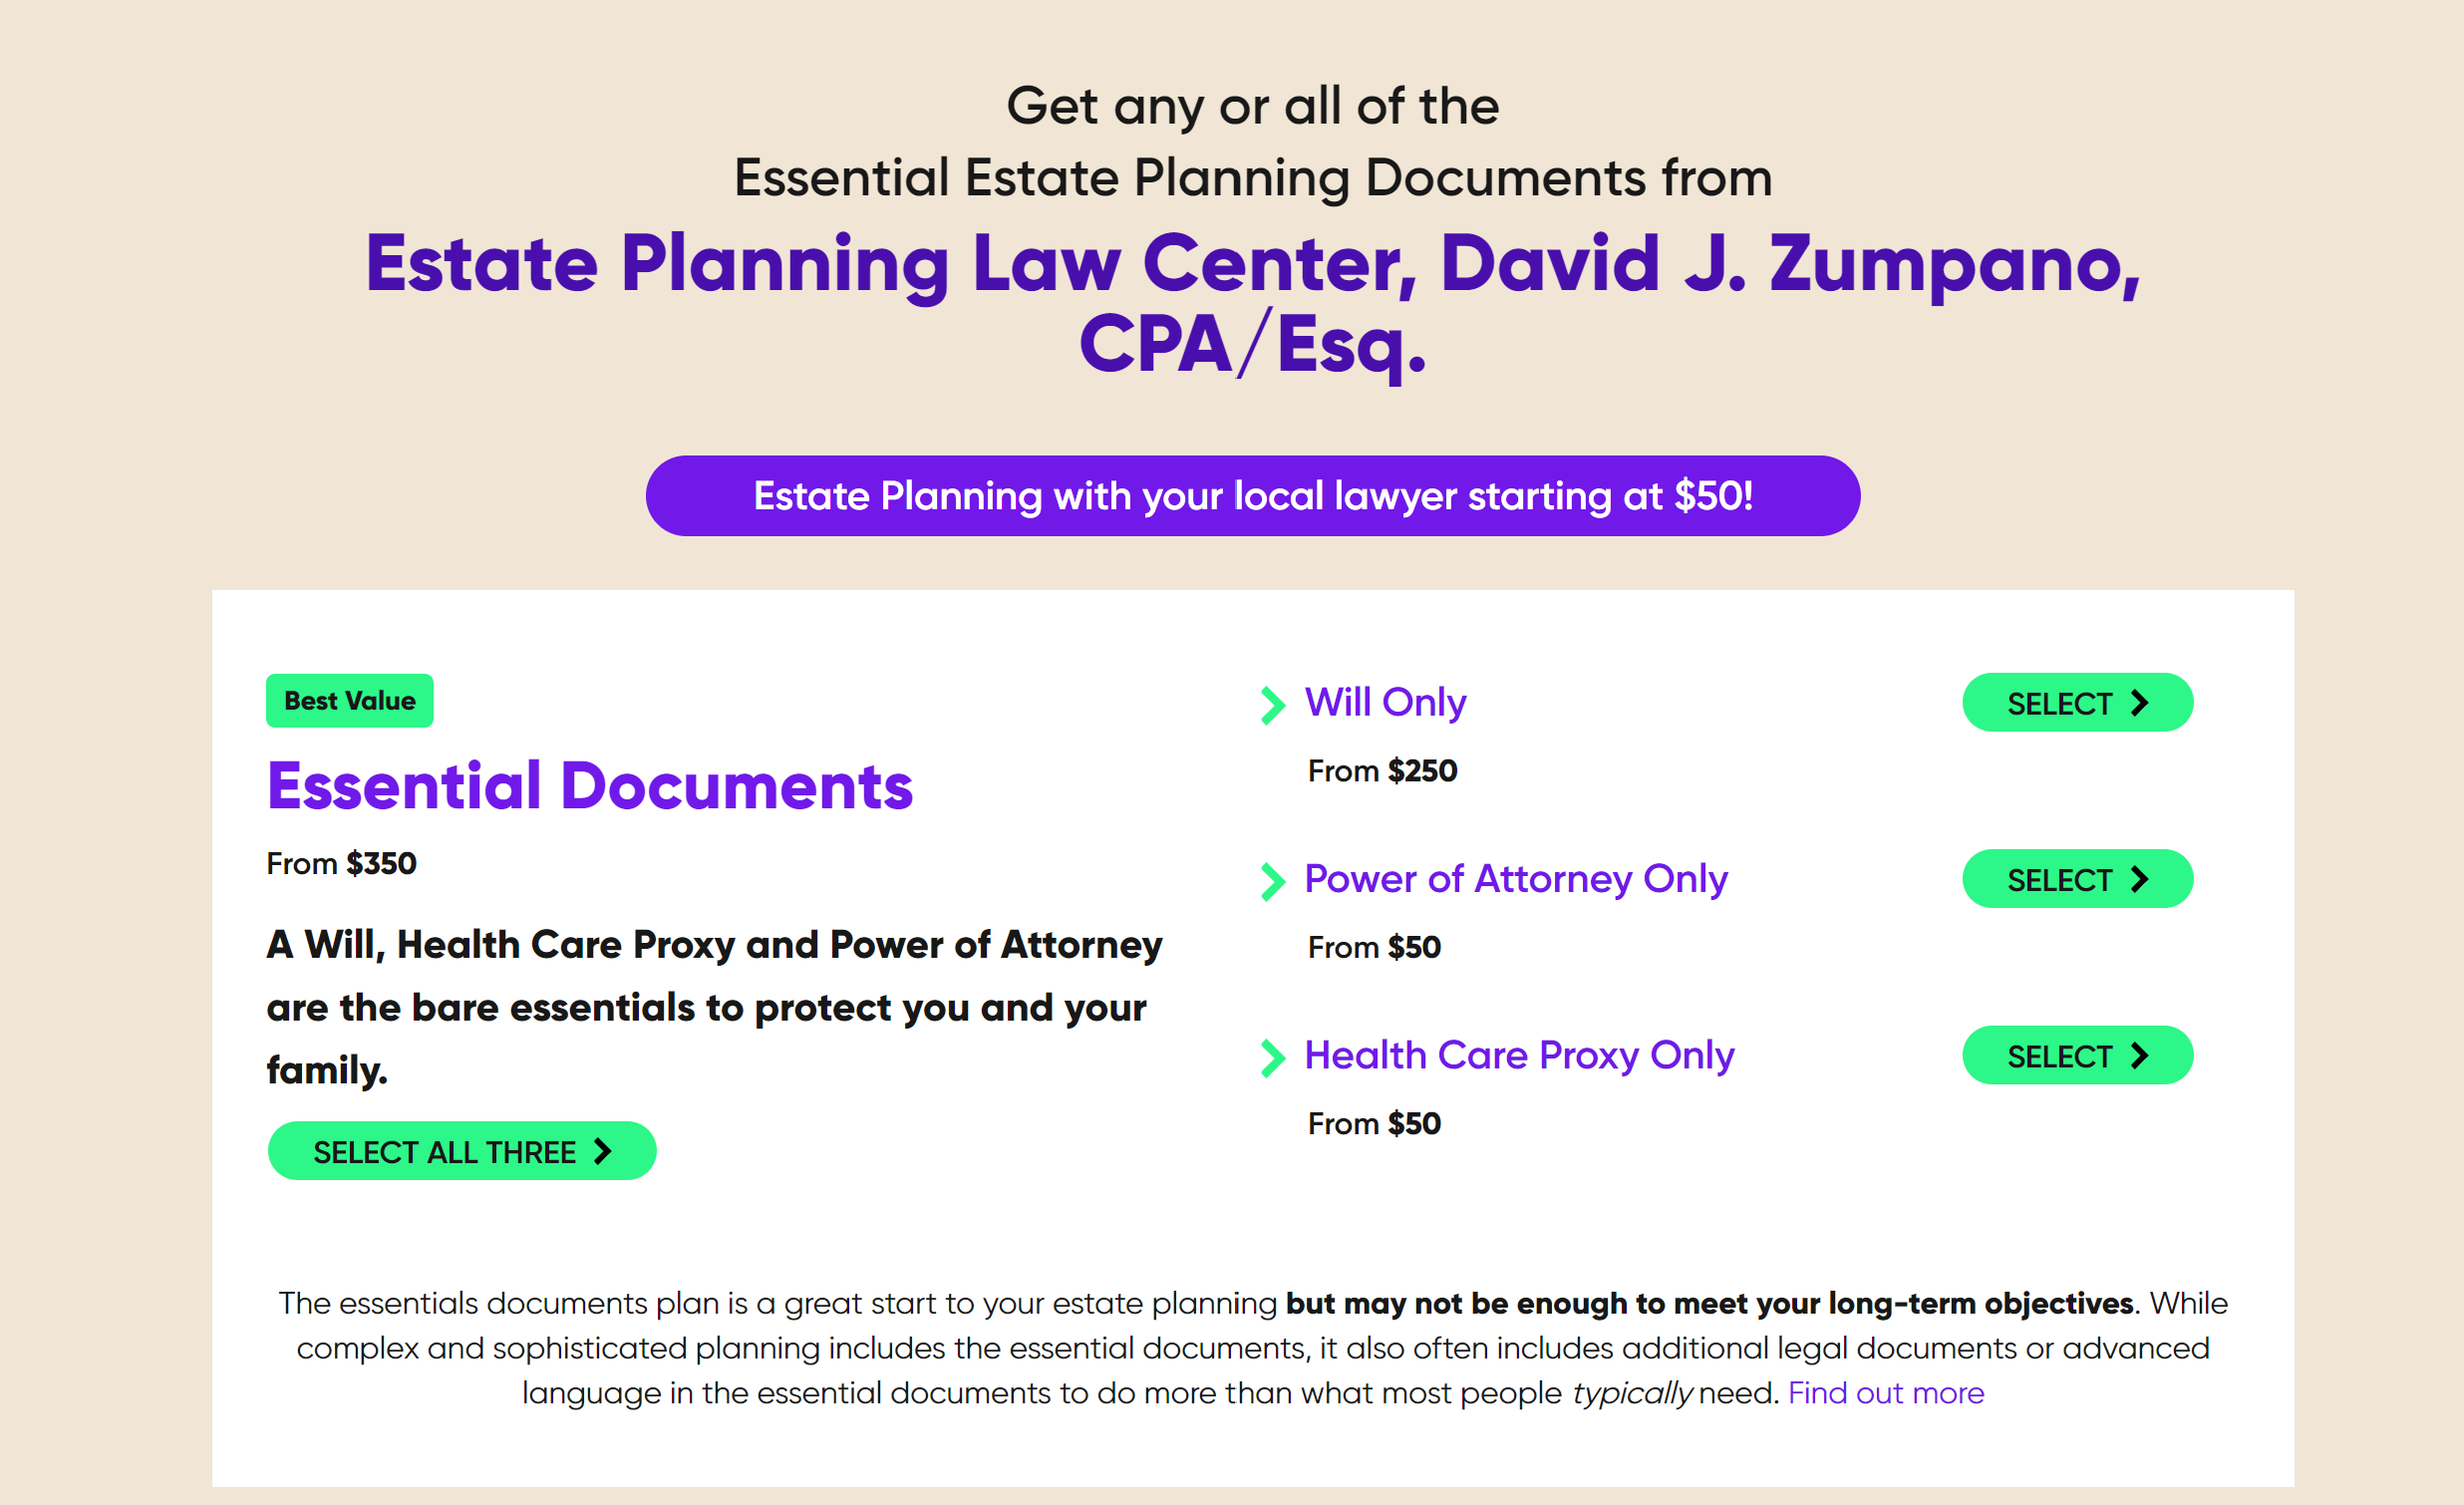 Get any of the essential estate planning documents from EPLC